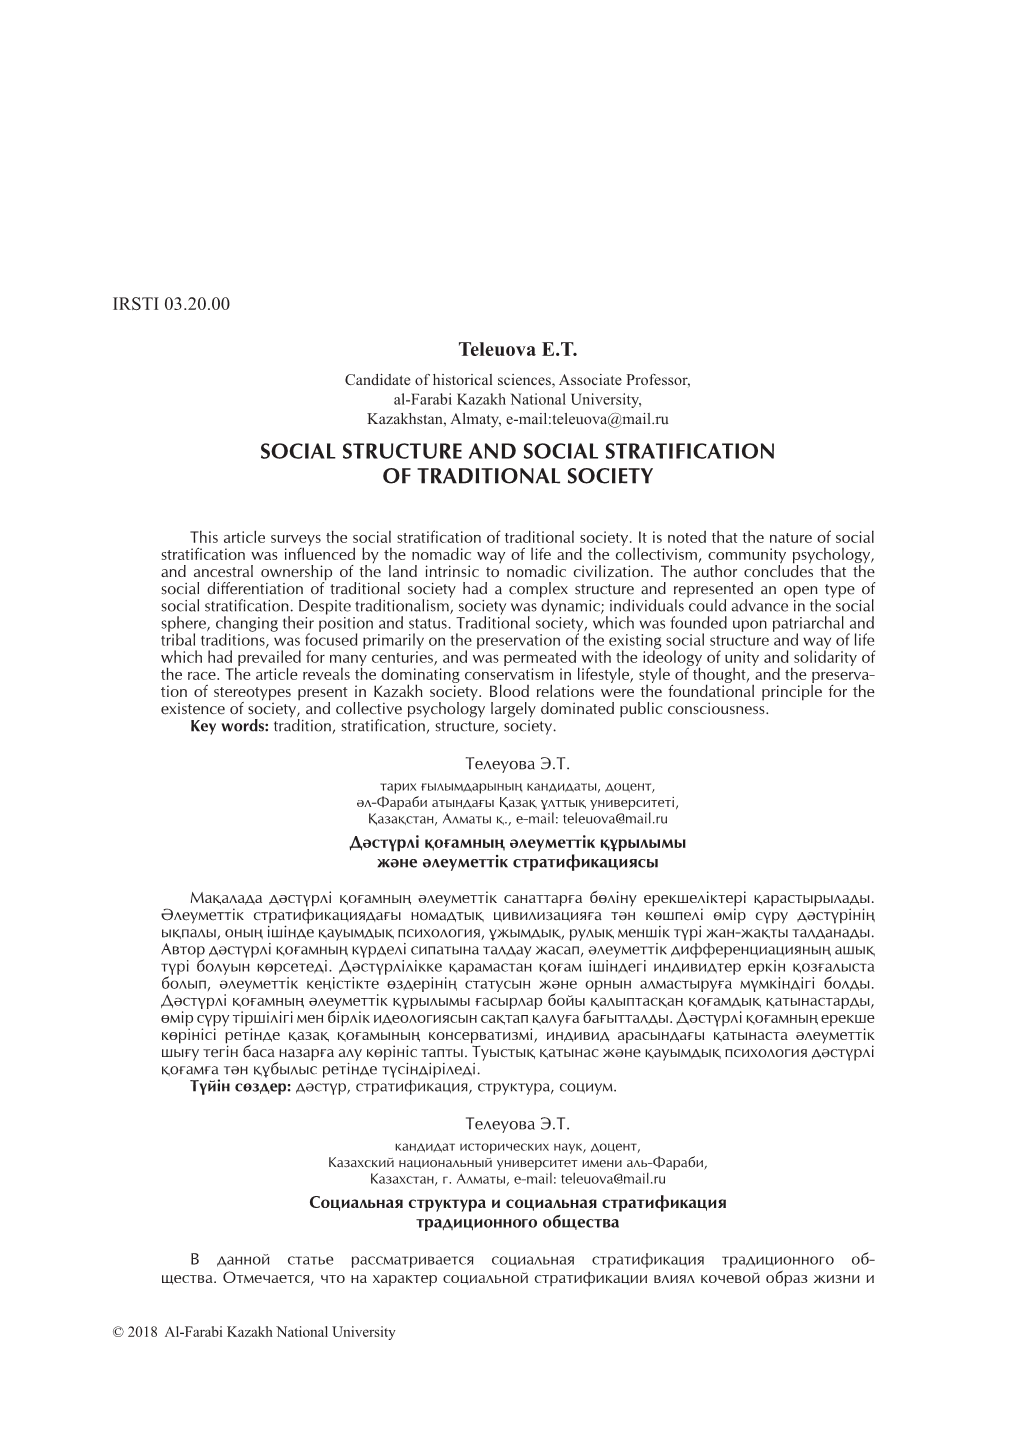 Teleuova E.T. SOCIAL STRUCTURE and SOCIAL STRATIFICATION OF